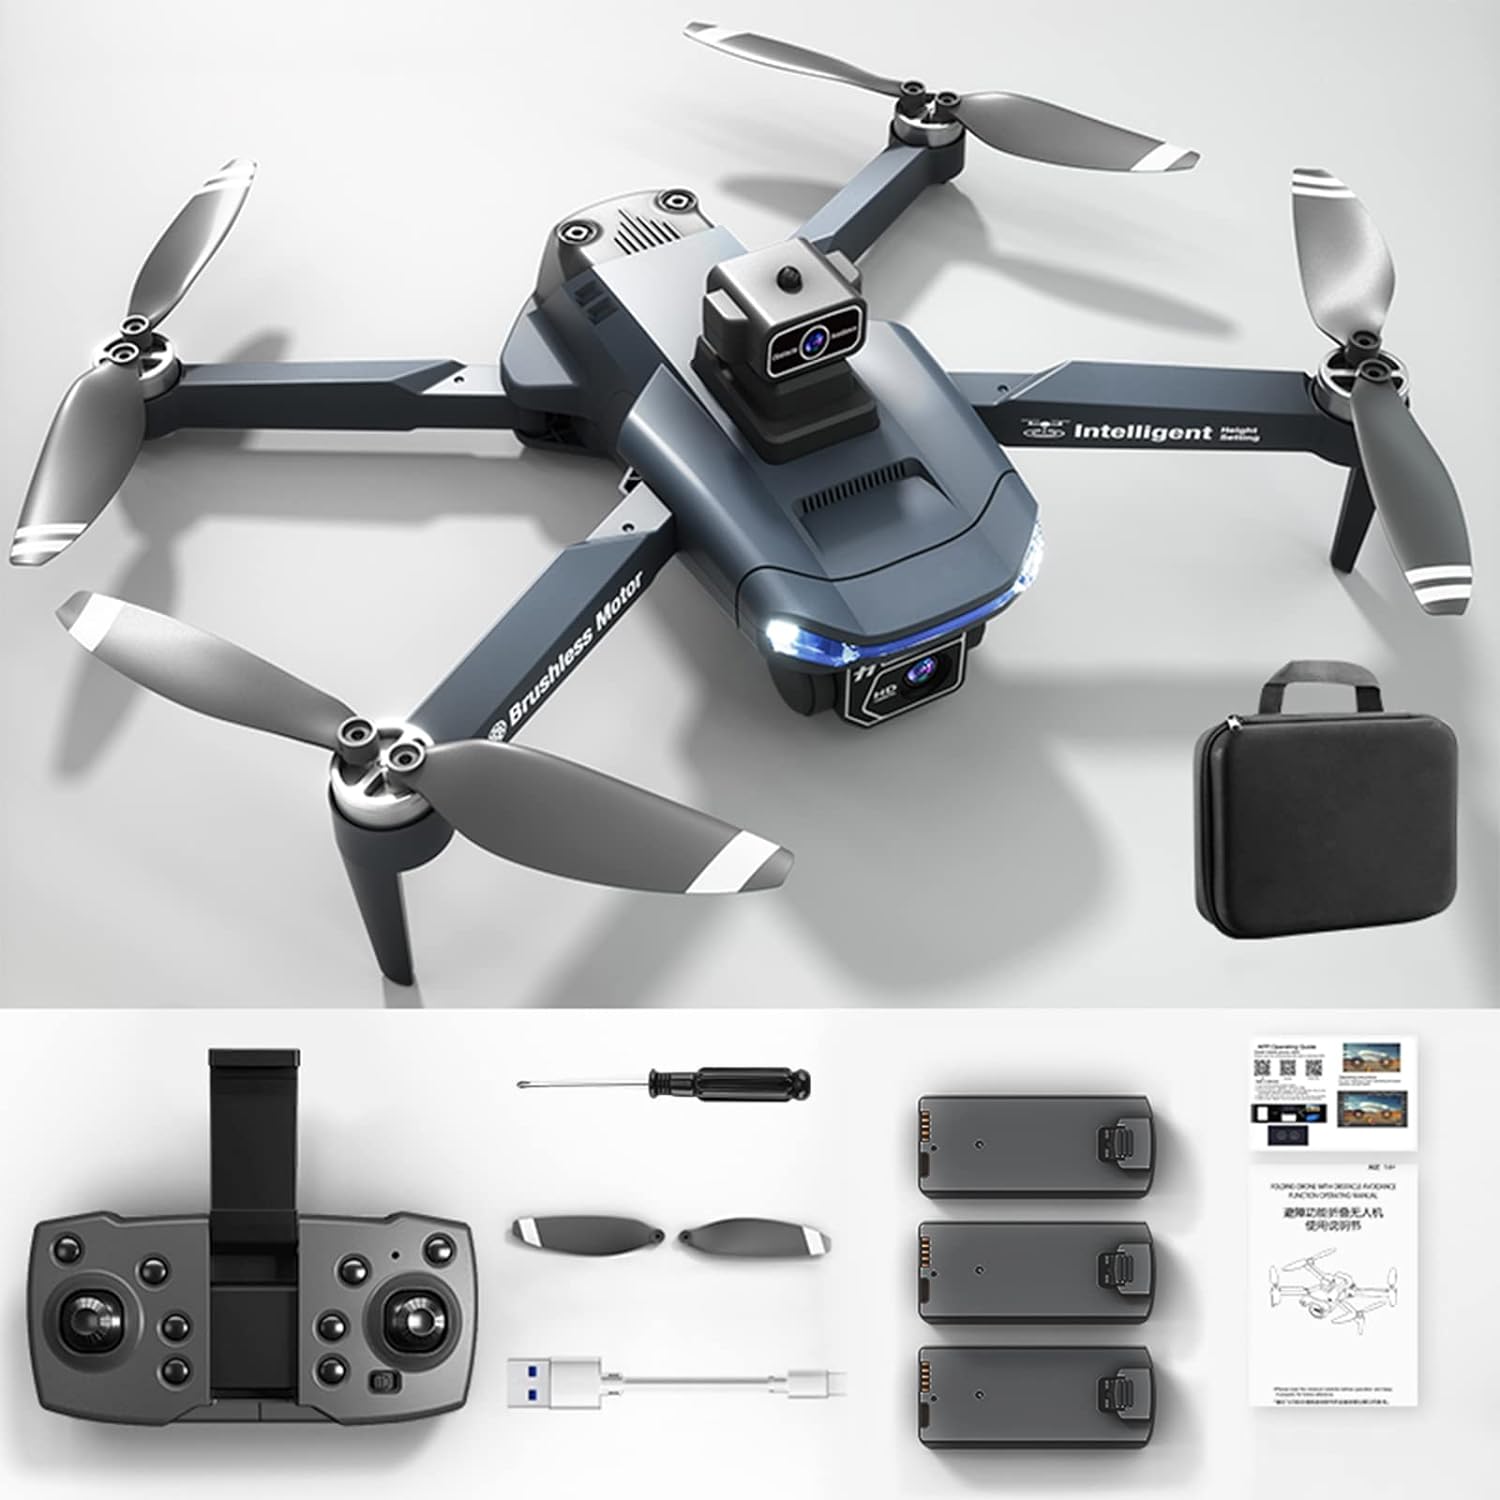 AIROKA RC Drone, Suitable for Adult Beginners Remote Control and Aerial Photography, Brushless Motor, Switchable Dual Camera, Trajectory Flight, Headless Mode, Is The First Choice of Drone Beginners, Can Be Used As A Holiday Gift.